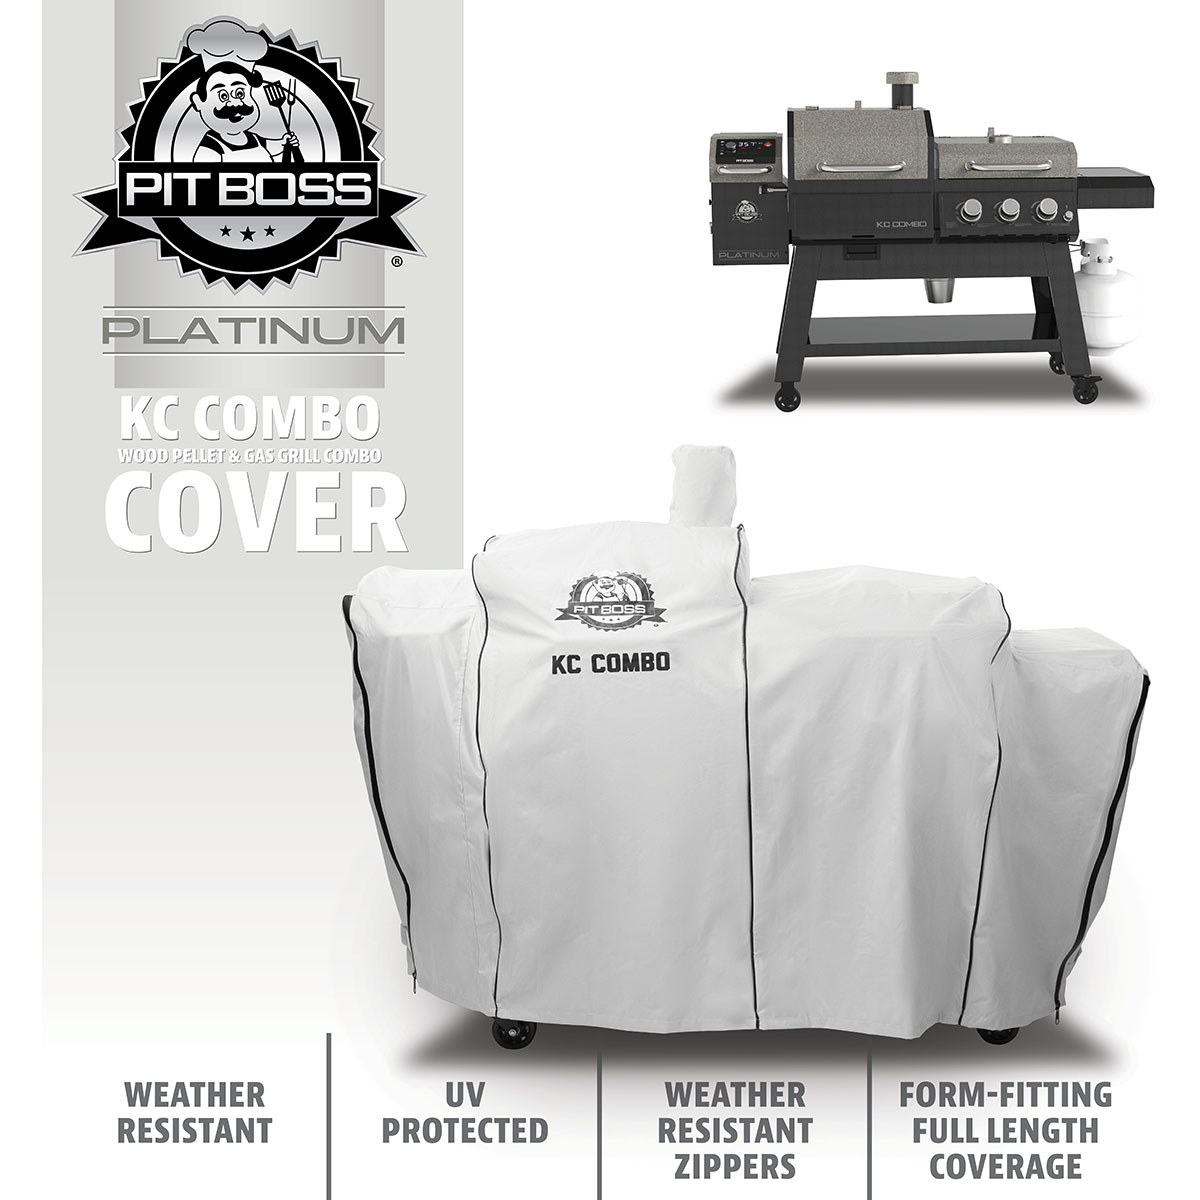 Pit Boss Platinum KC Combo Grill Cover, Fits KC Combo Platinum Grill - image 4 of 12